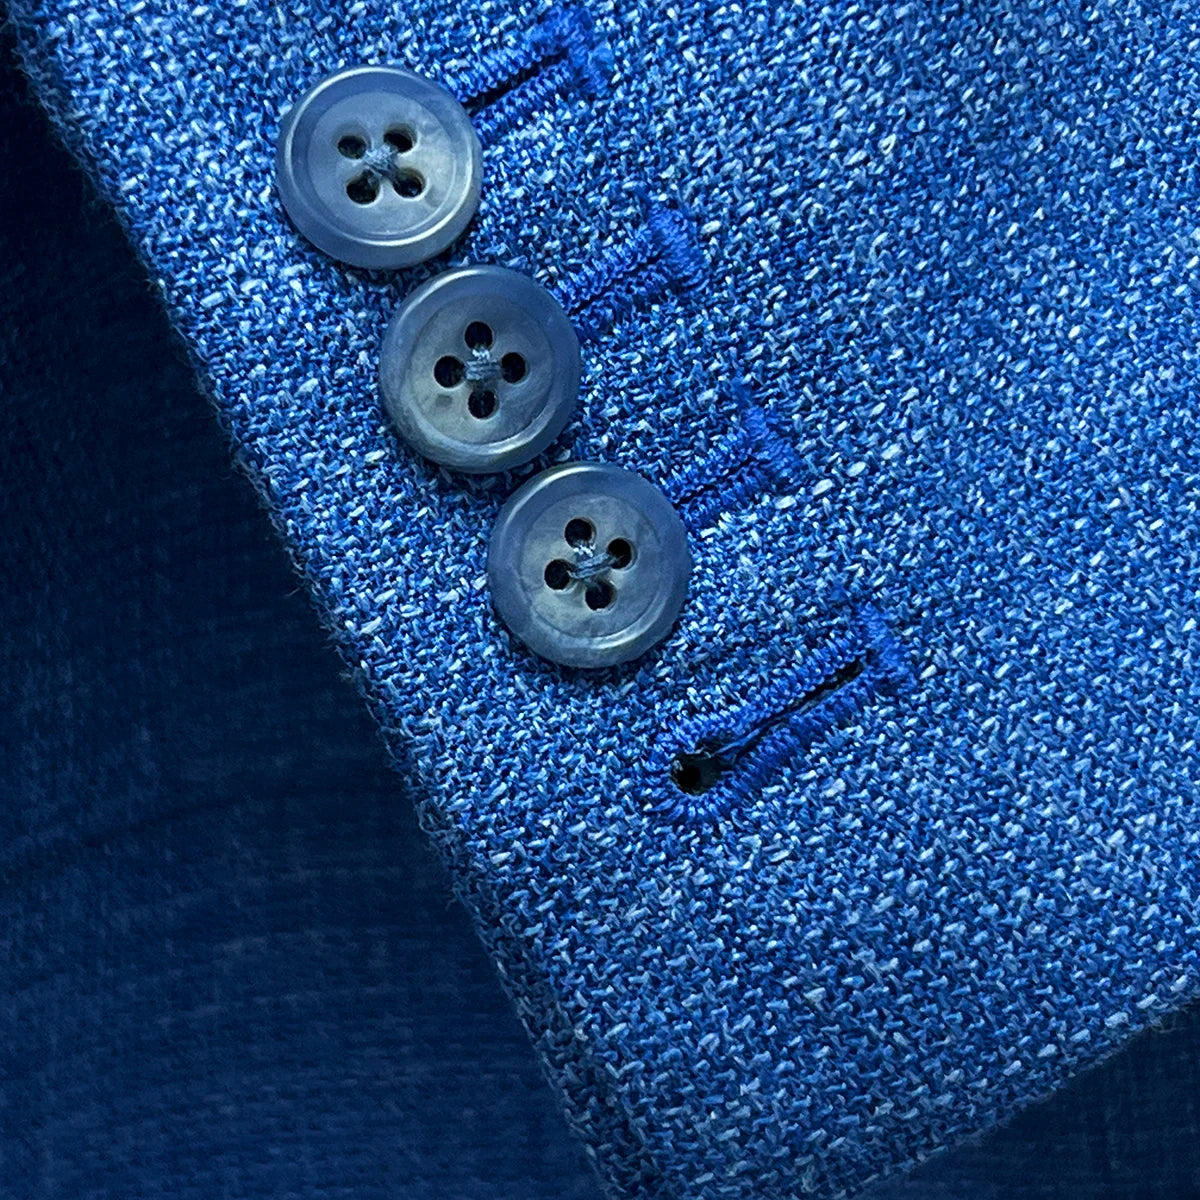 Functional sleeve buttonholes on the sportcoat, featuring matching pick stitching and blue horn buttons.